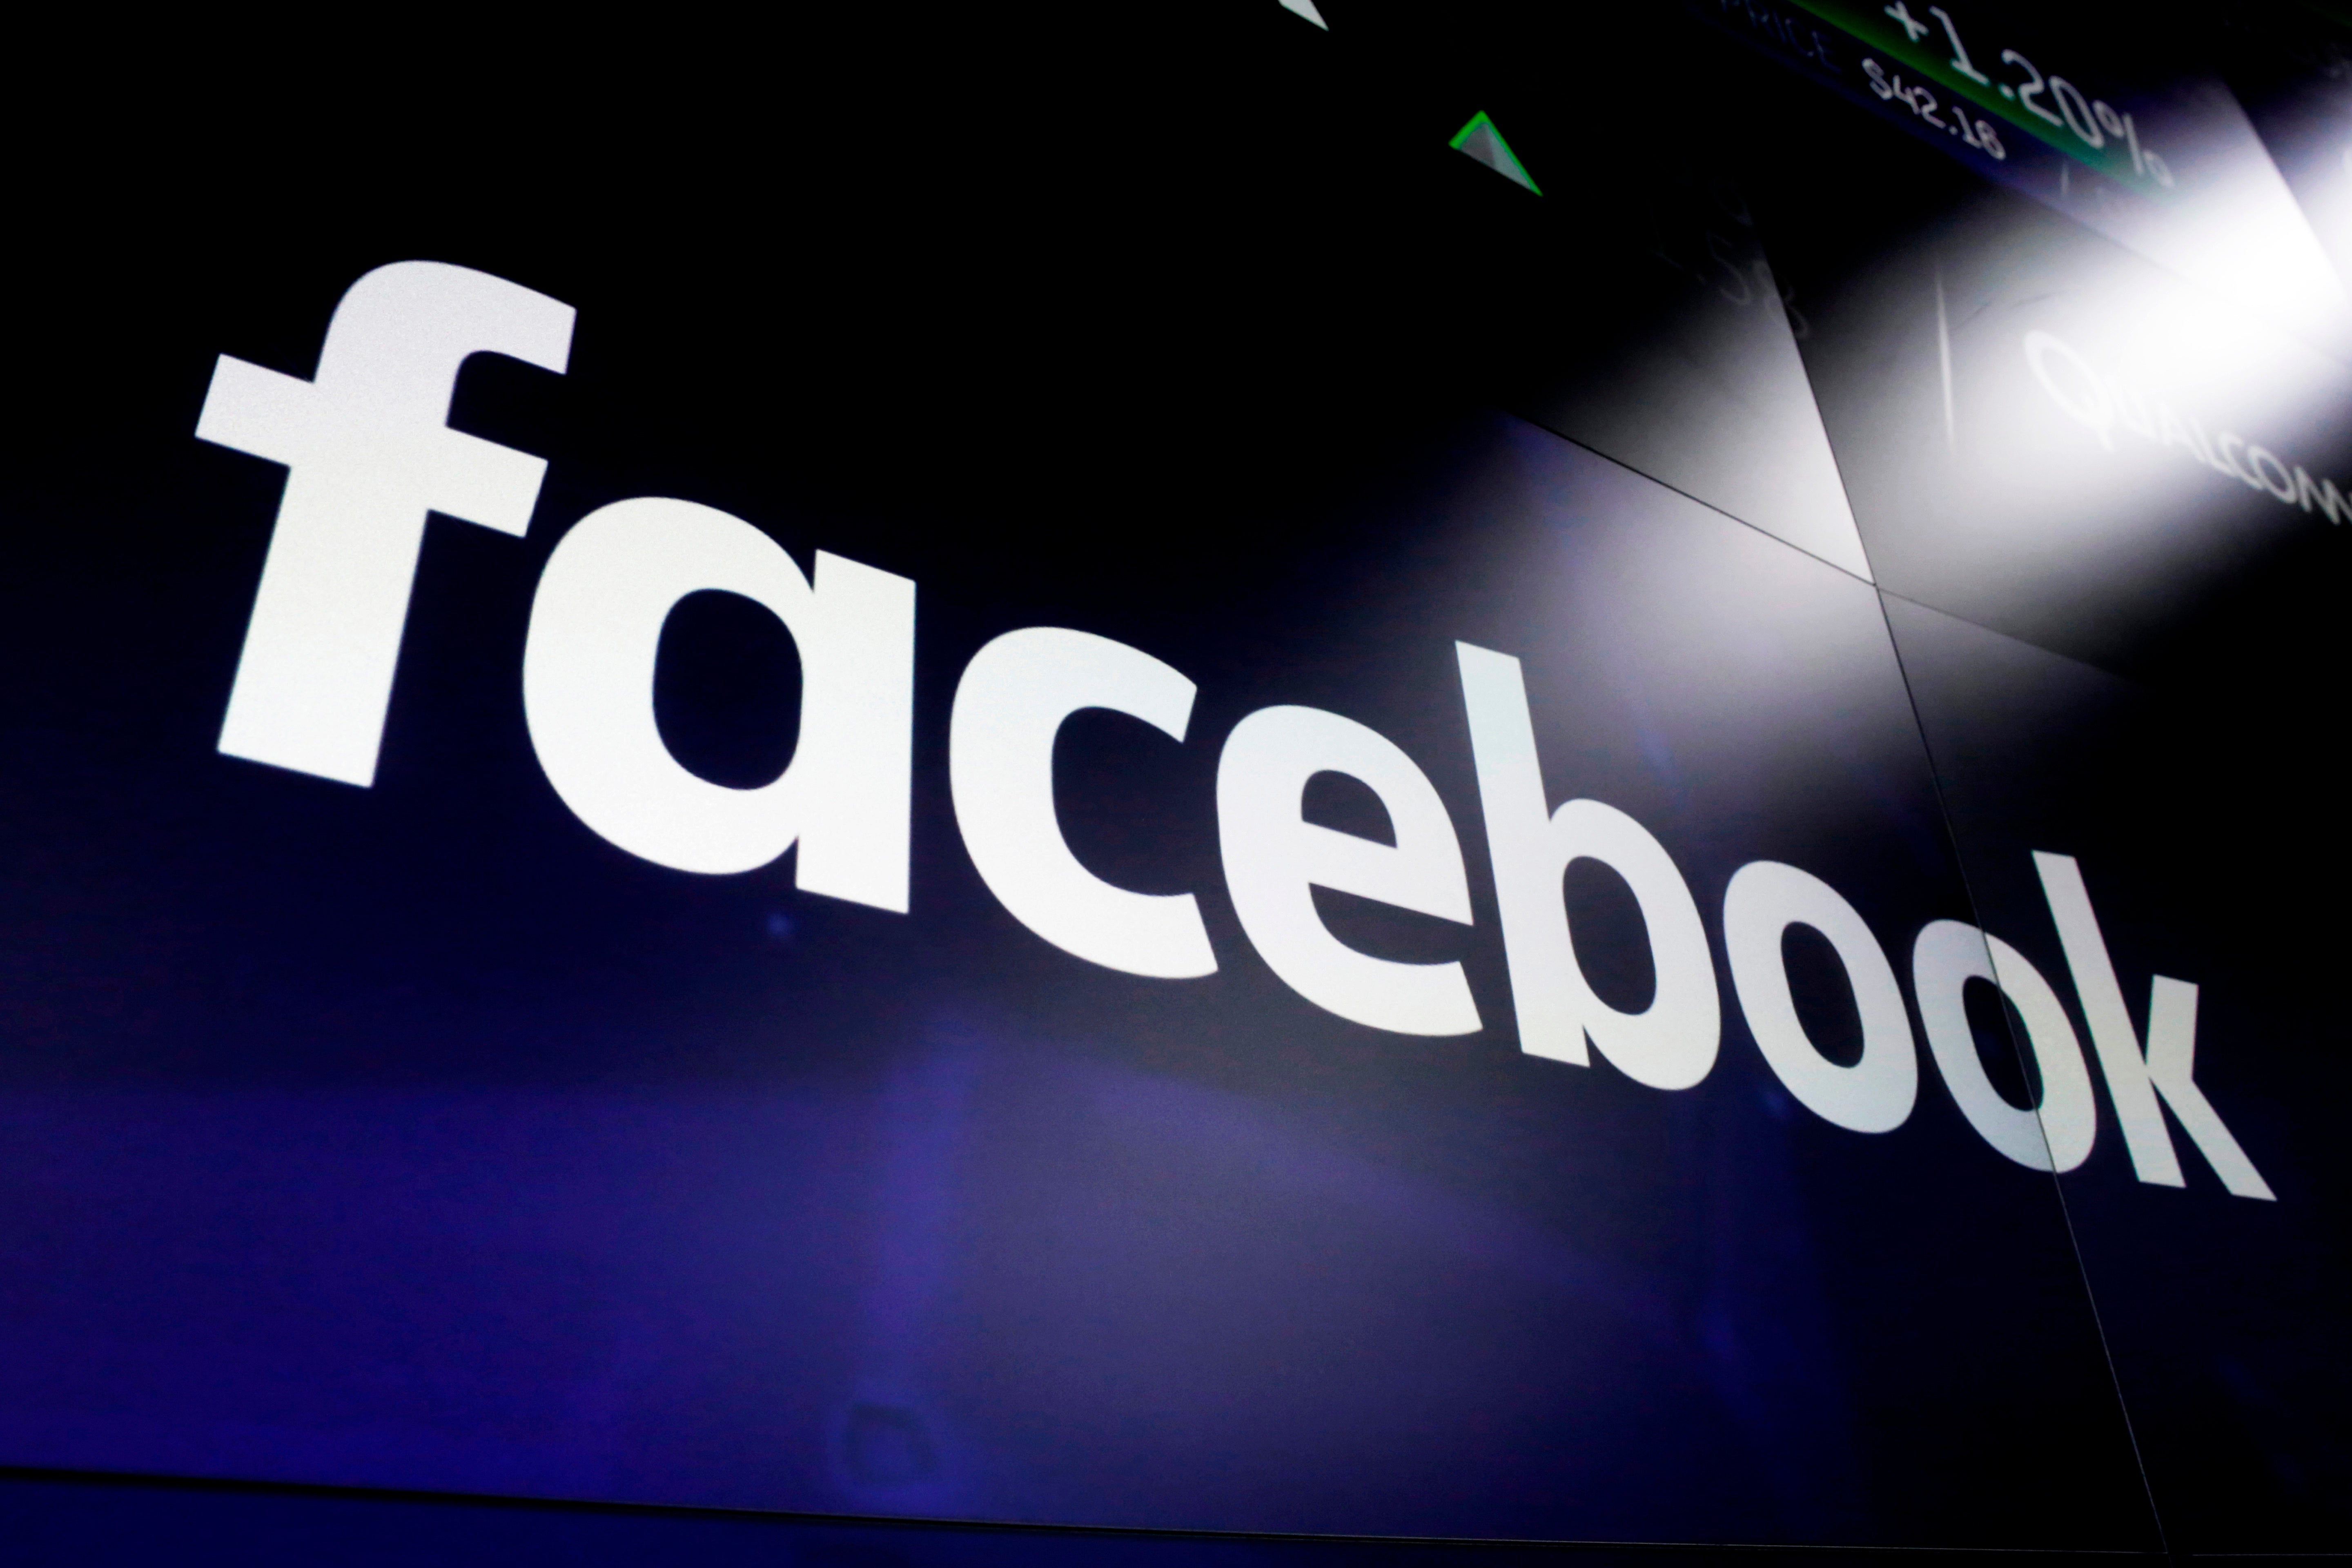 ‘It seems Facebook thinks it’s bigger and mightier than the Australian government’